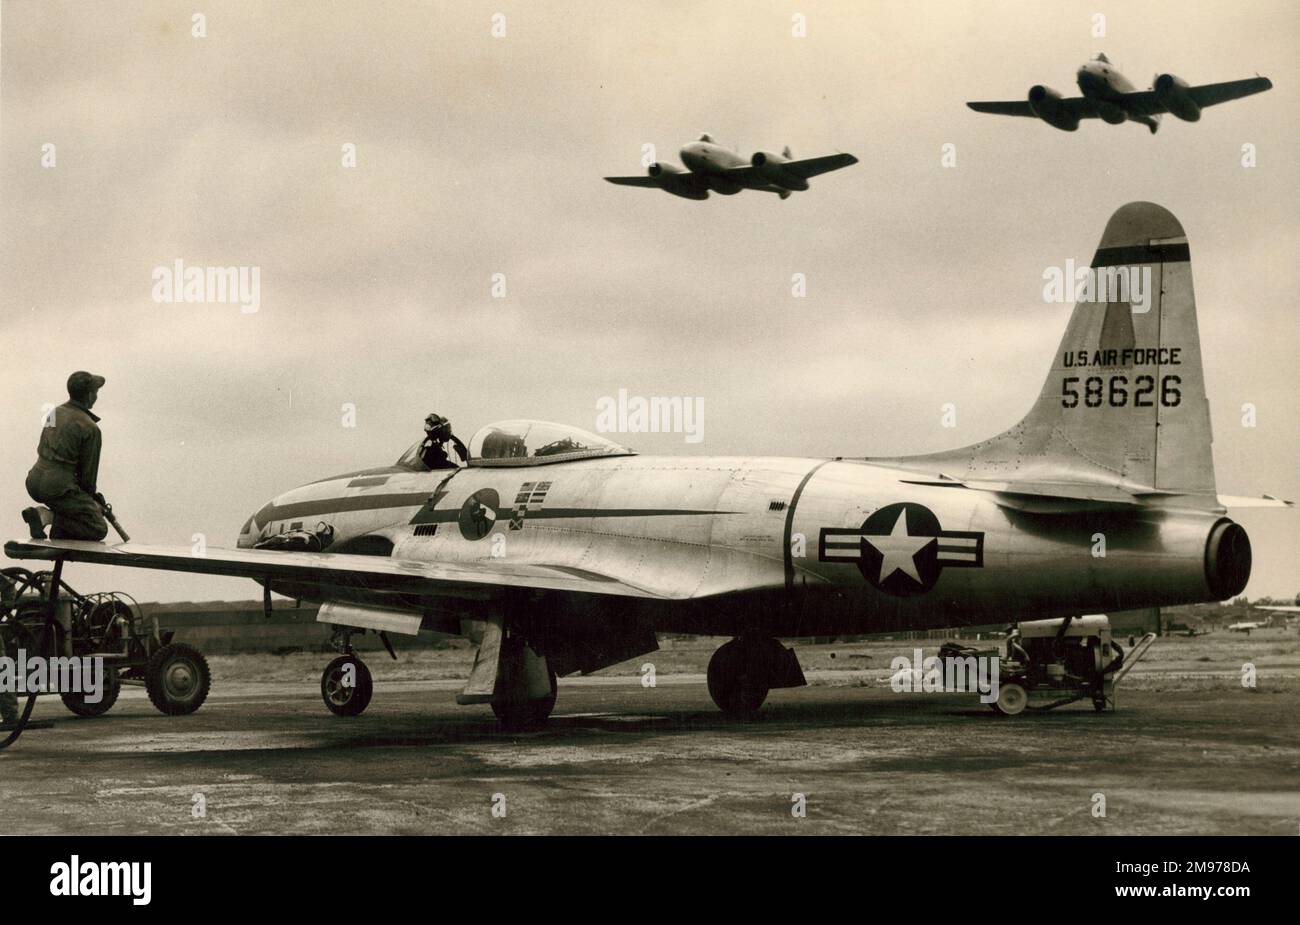 Lockheed P-80B-1-LO Shooting Star, 45-8626, overflown by two Gloster Meteor F4s. Stock Photo